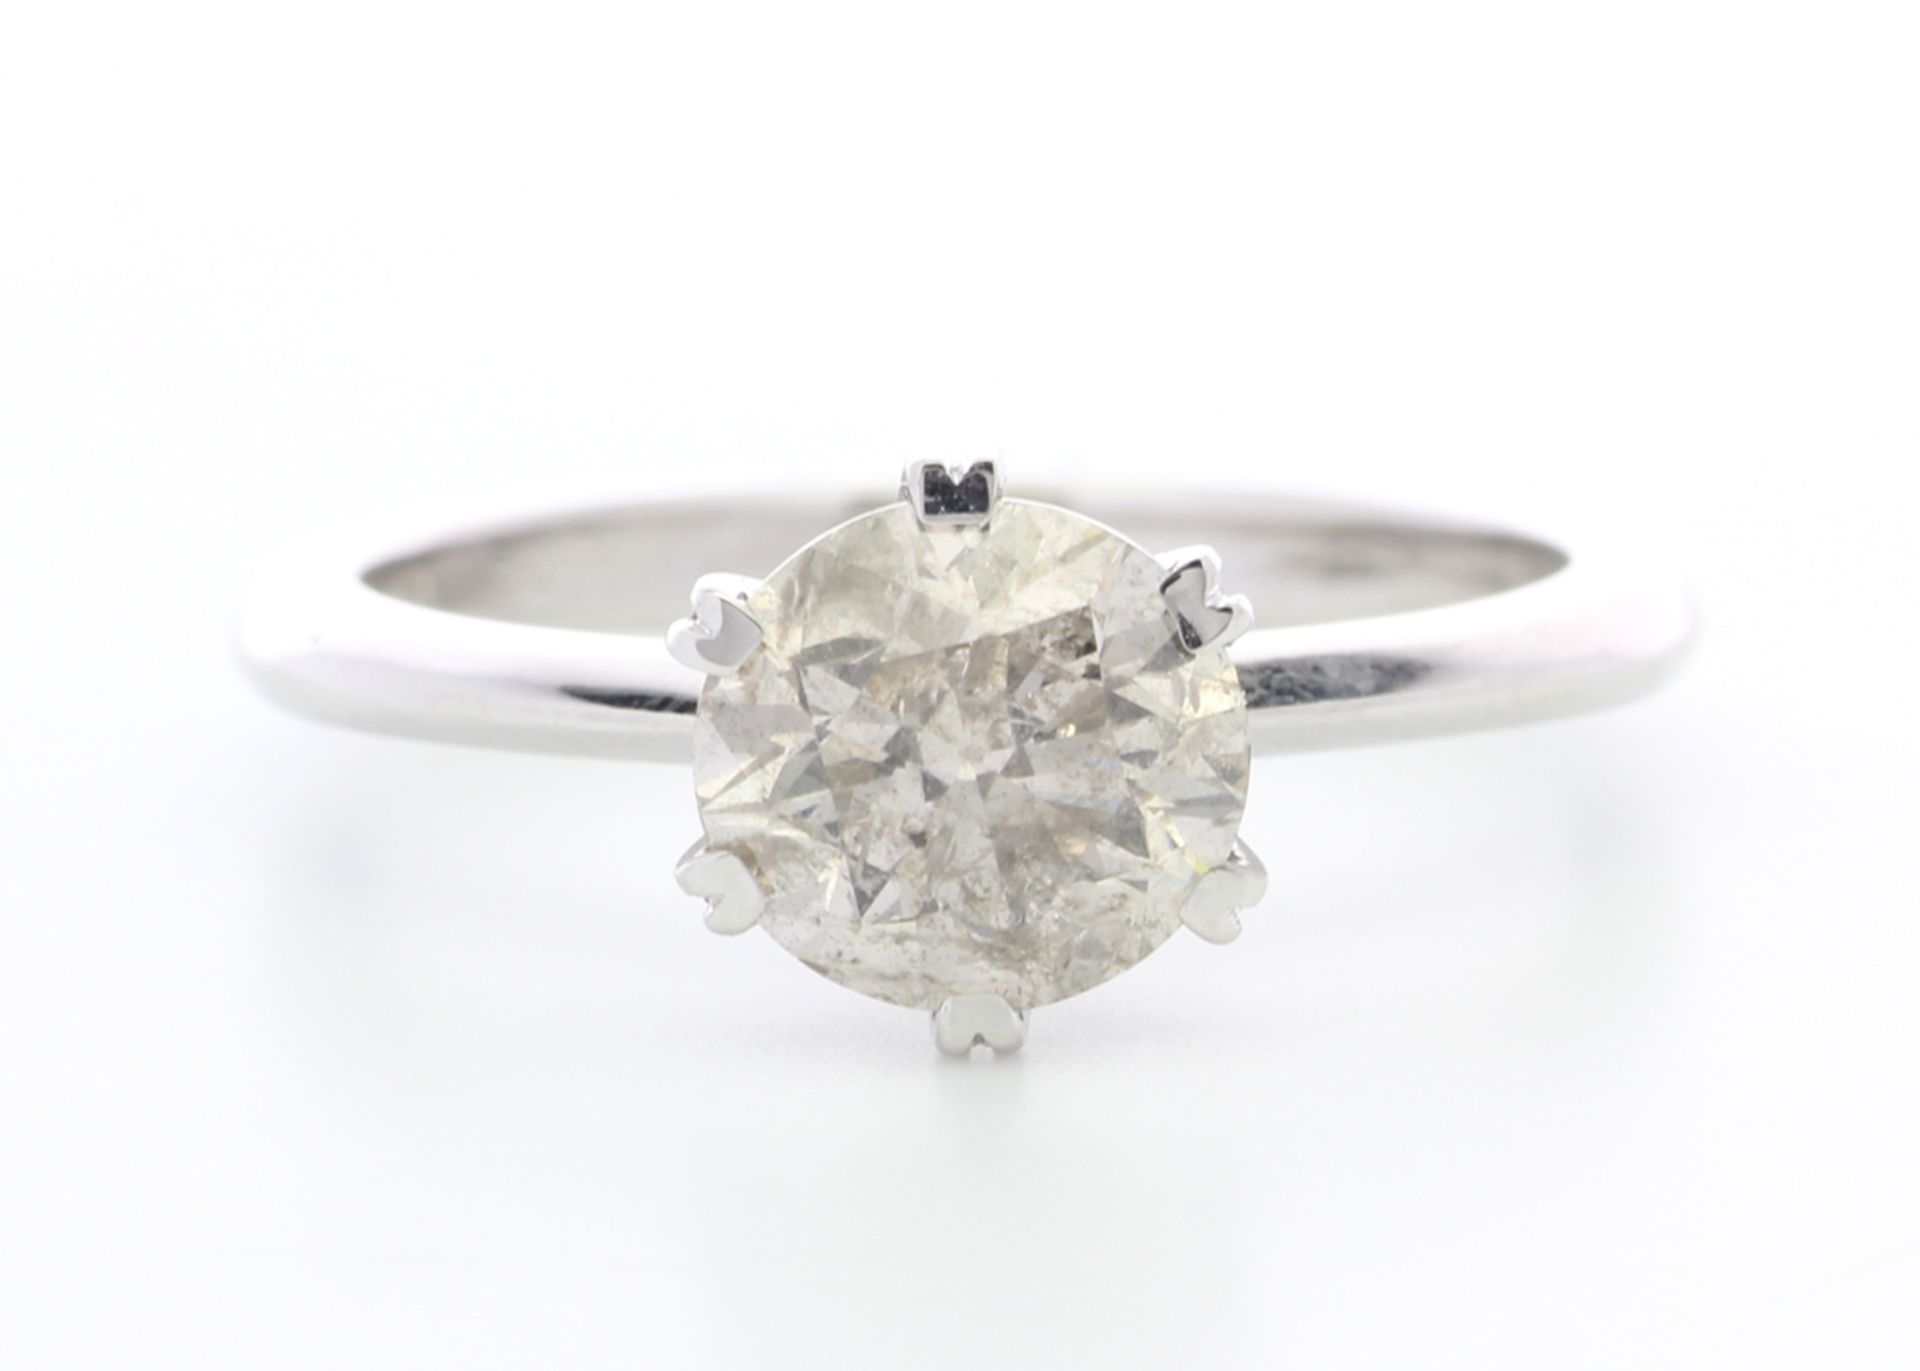 Valued by GIE £27,695.00 - 18ct White Gold Single Stone Claw Set Diamond Ring 1.70 Carats - 3103165,